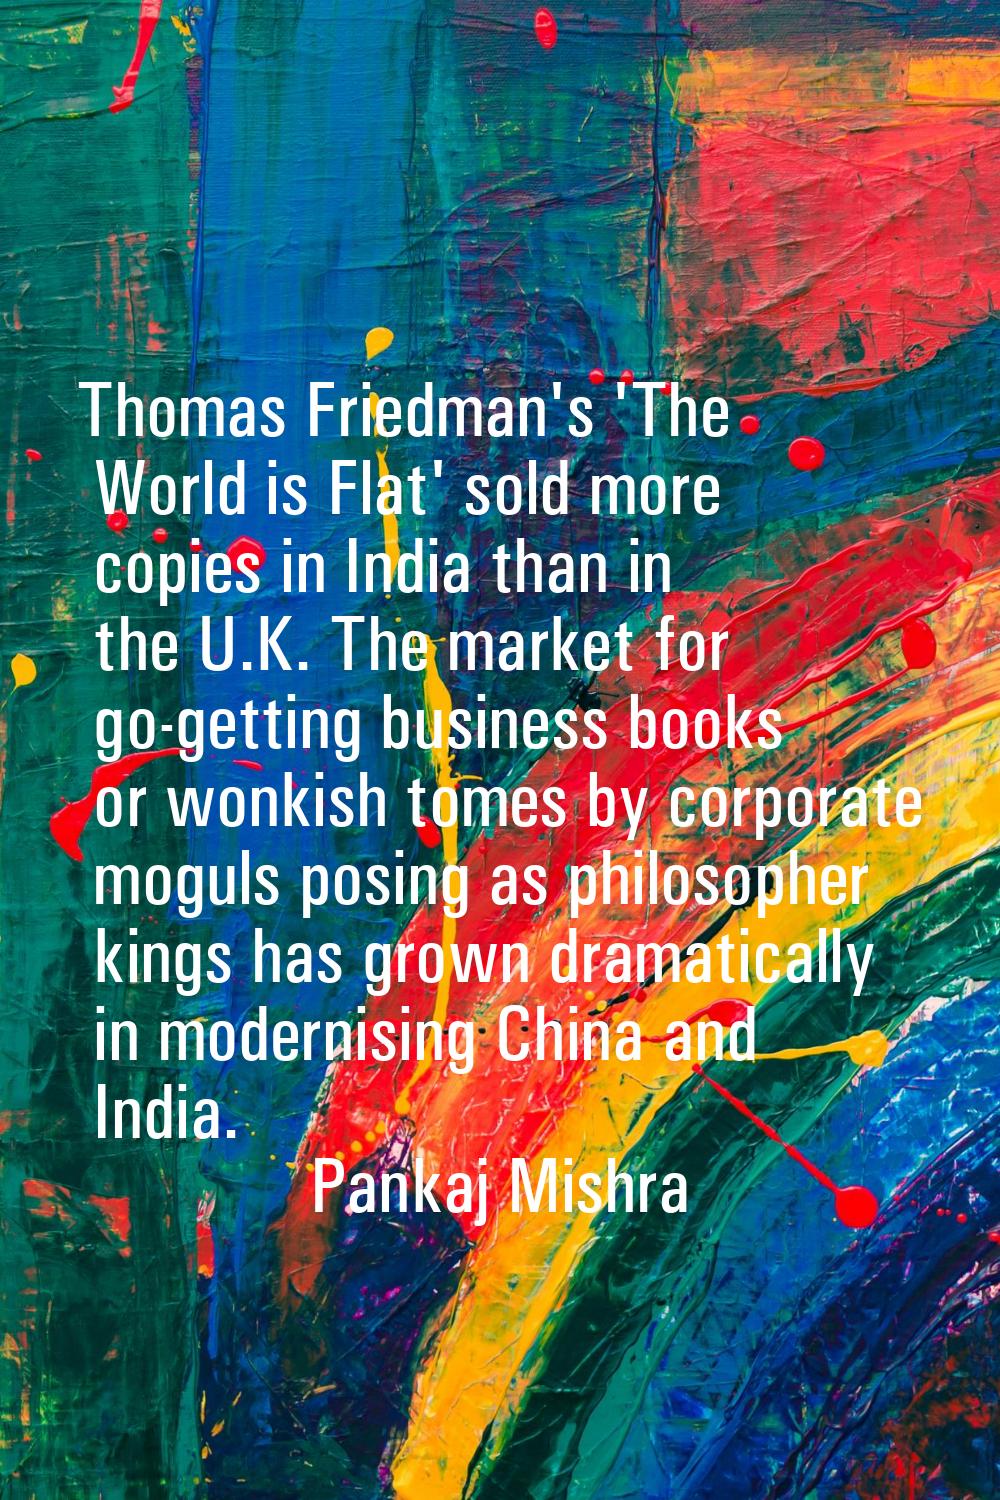 Thomas Friedman's 'The World is Flat' sold more copies in India than in the U.K. The market for go-